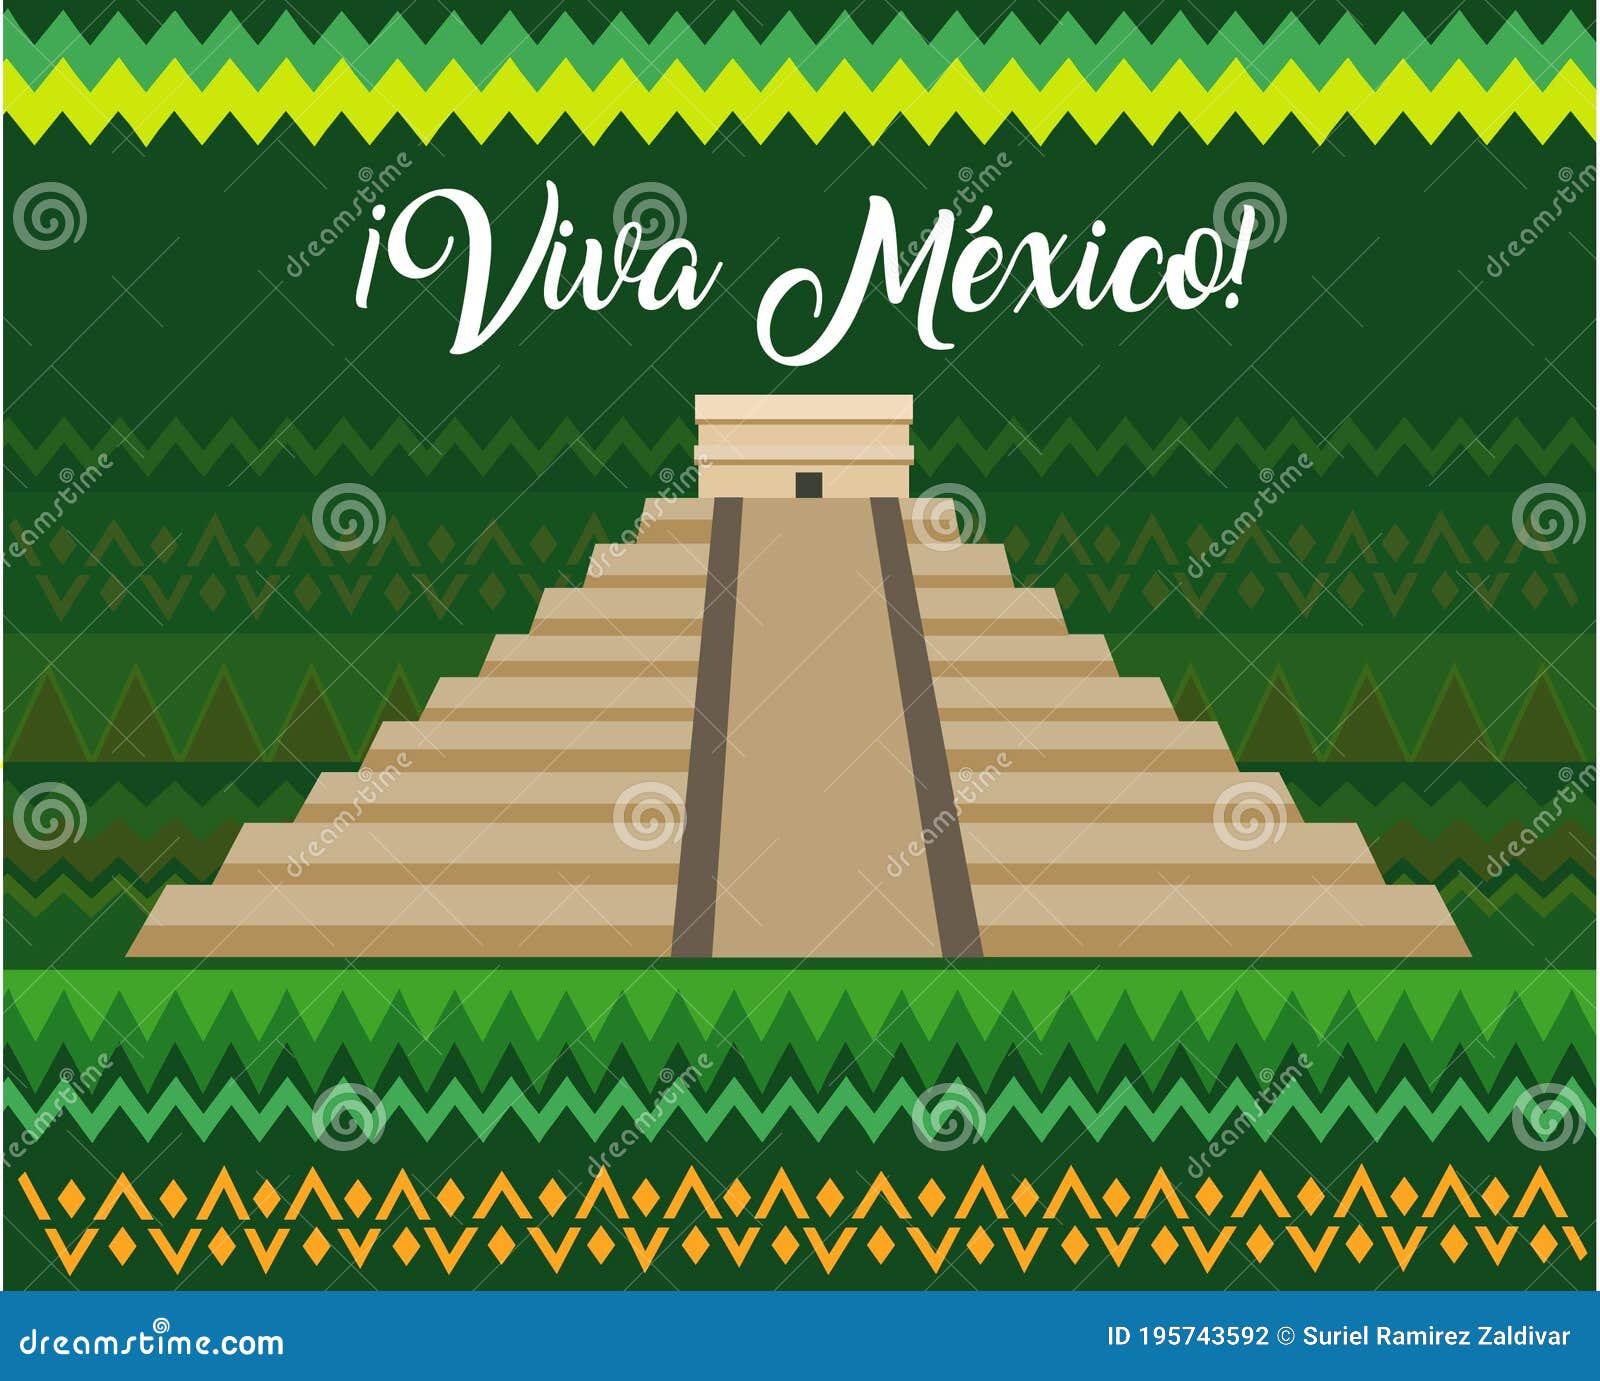 Pyramid Illustration with Mexican Decorative Background, Text in ...